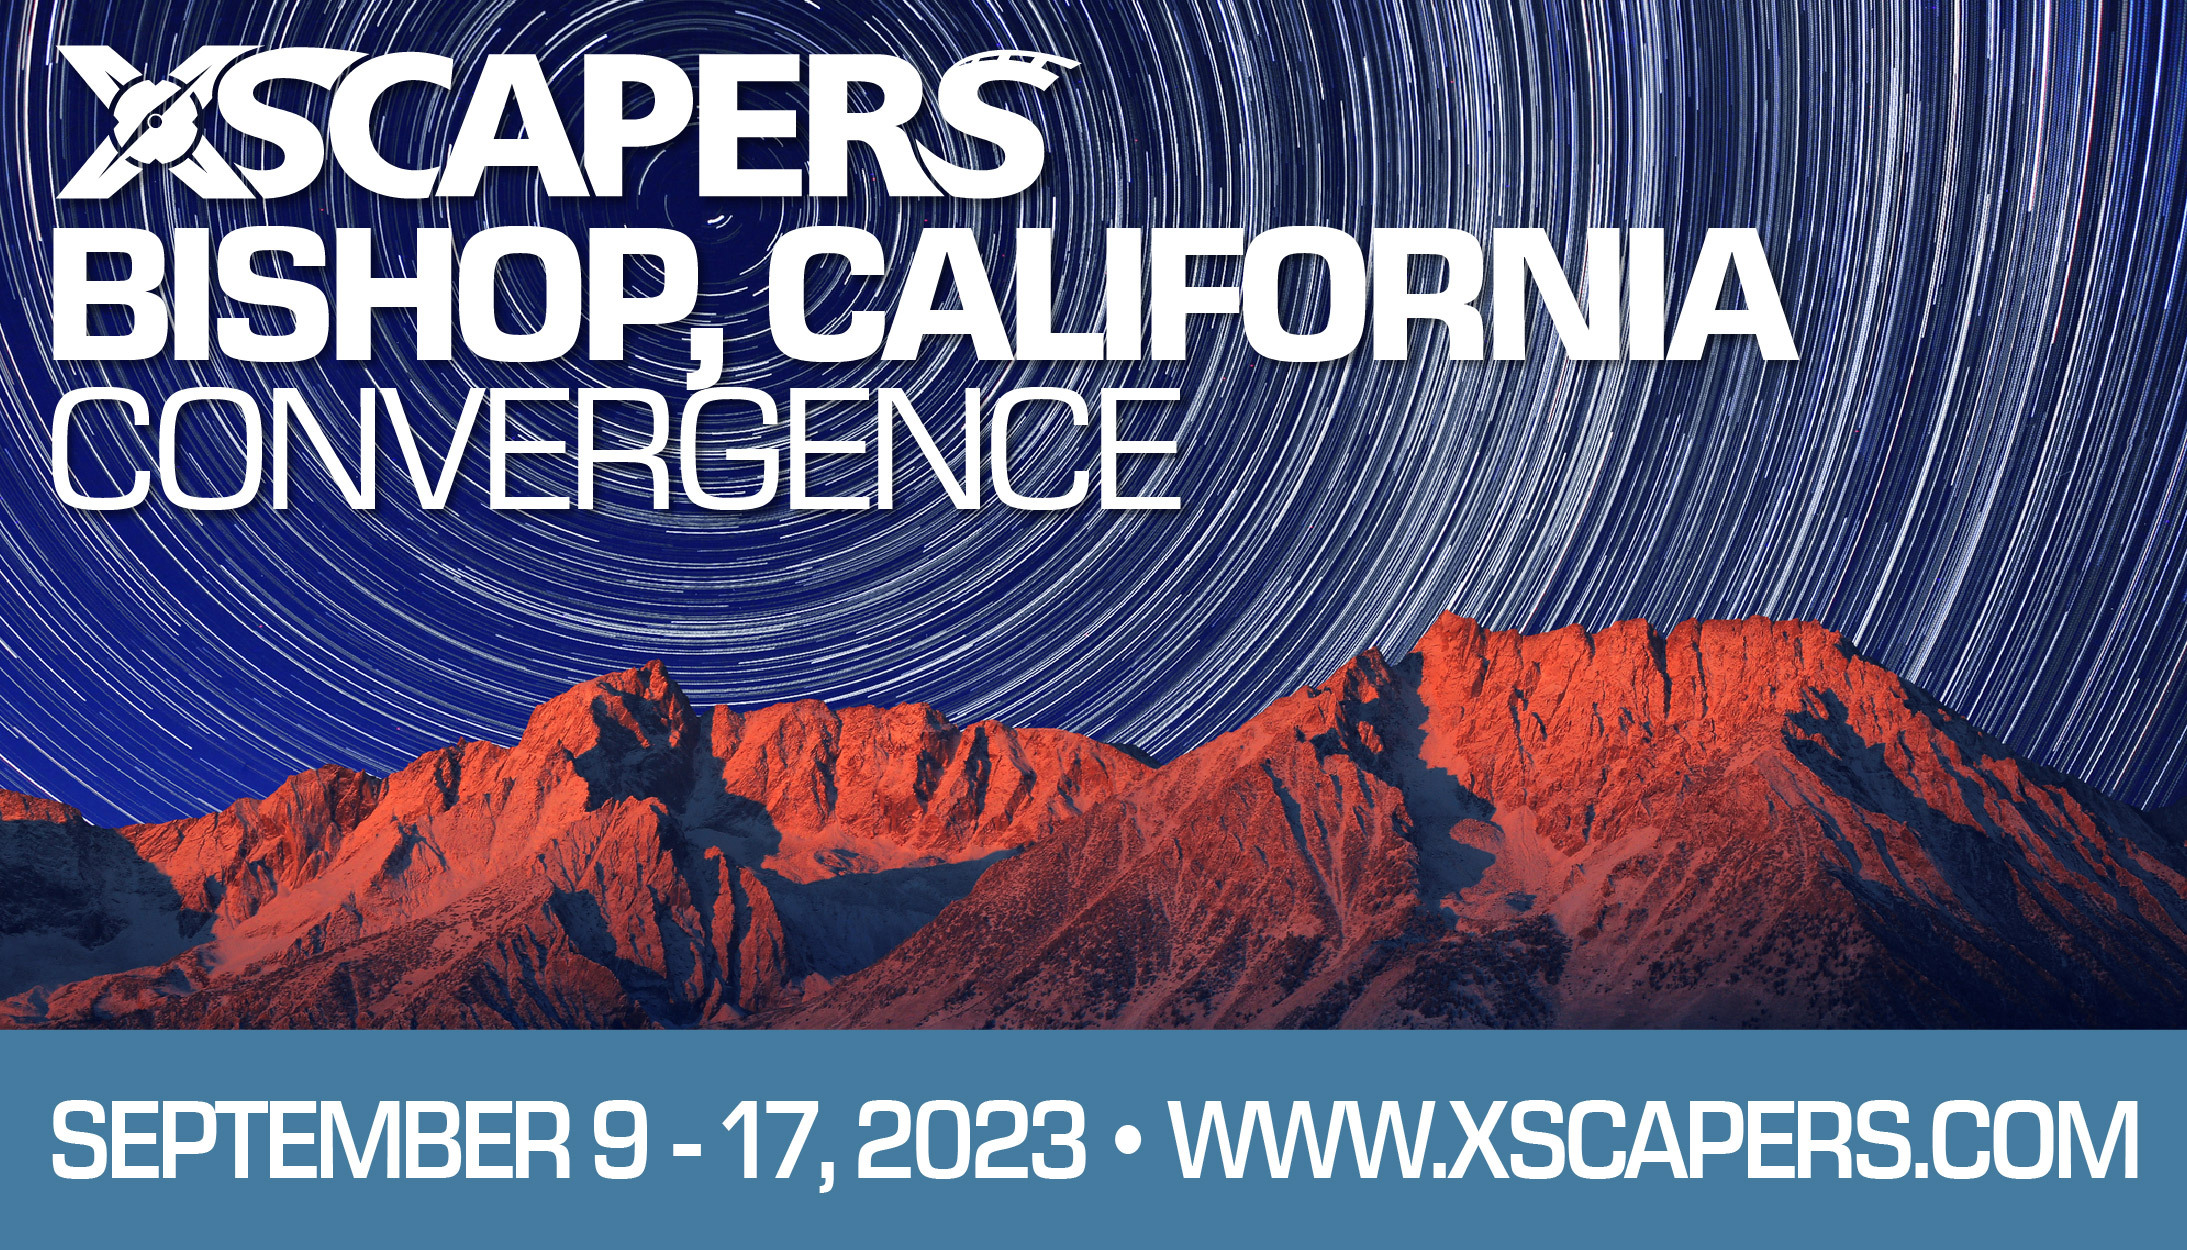 Xscapers Bishop, California Convergence 2023 1